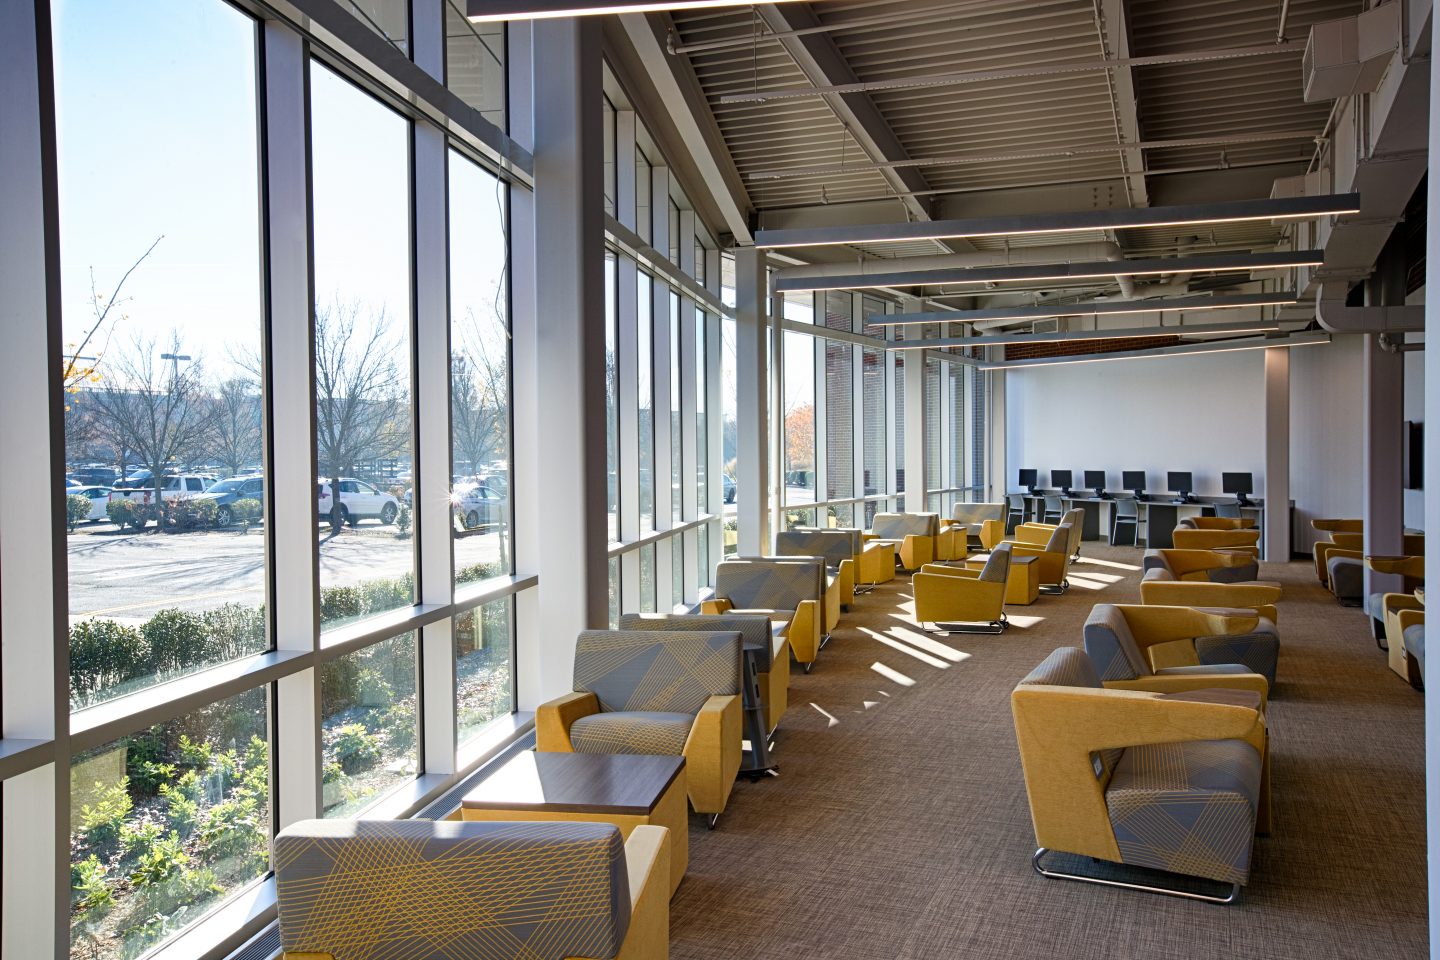 Seating area in the student lounge on the first floor of the the UC